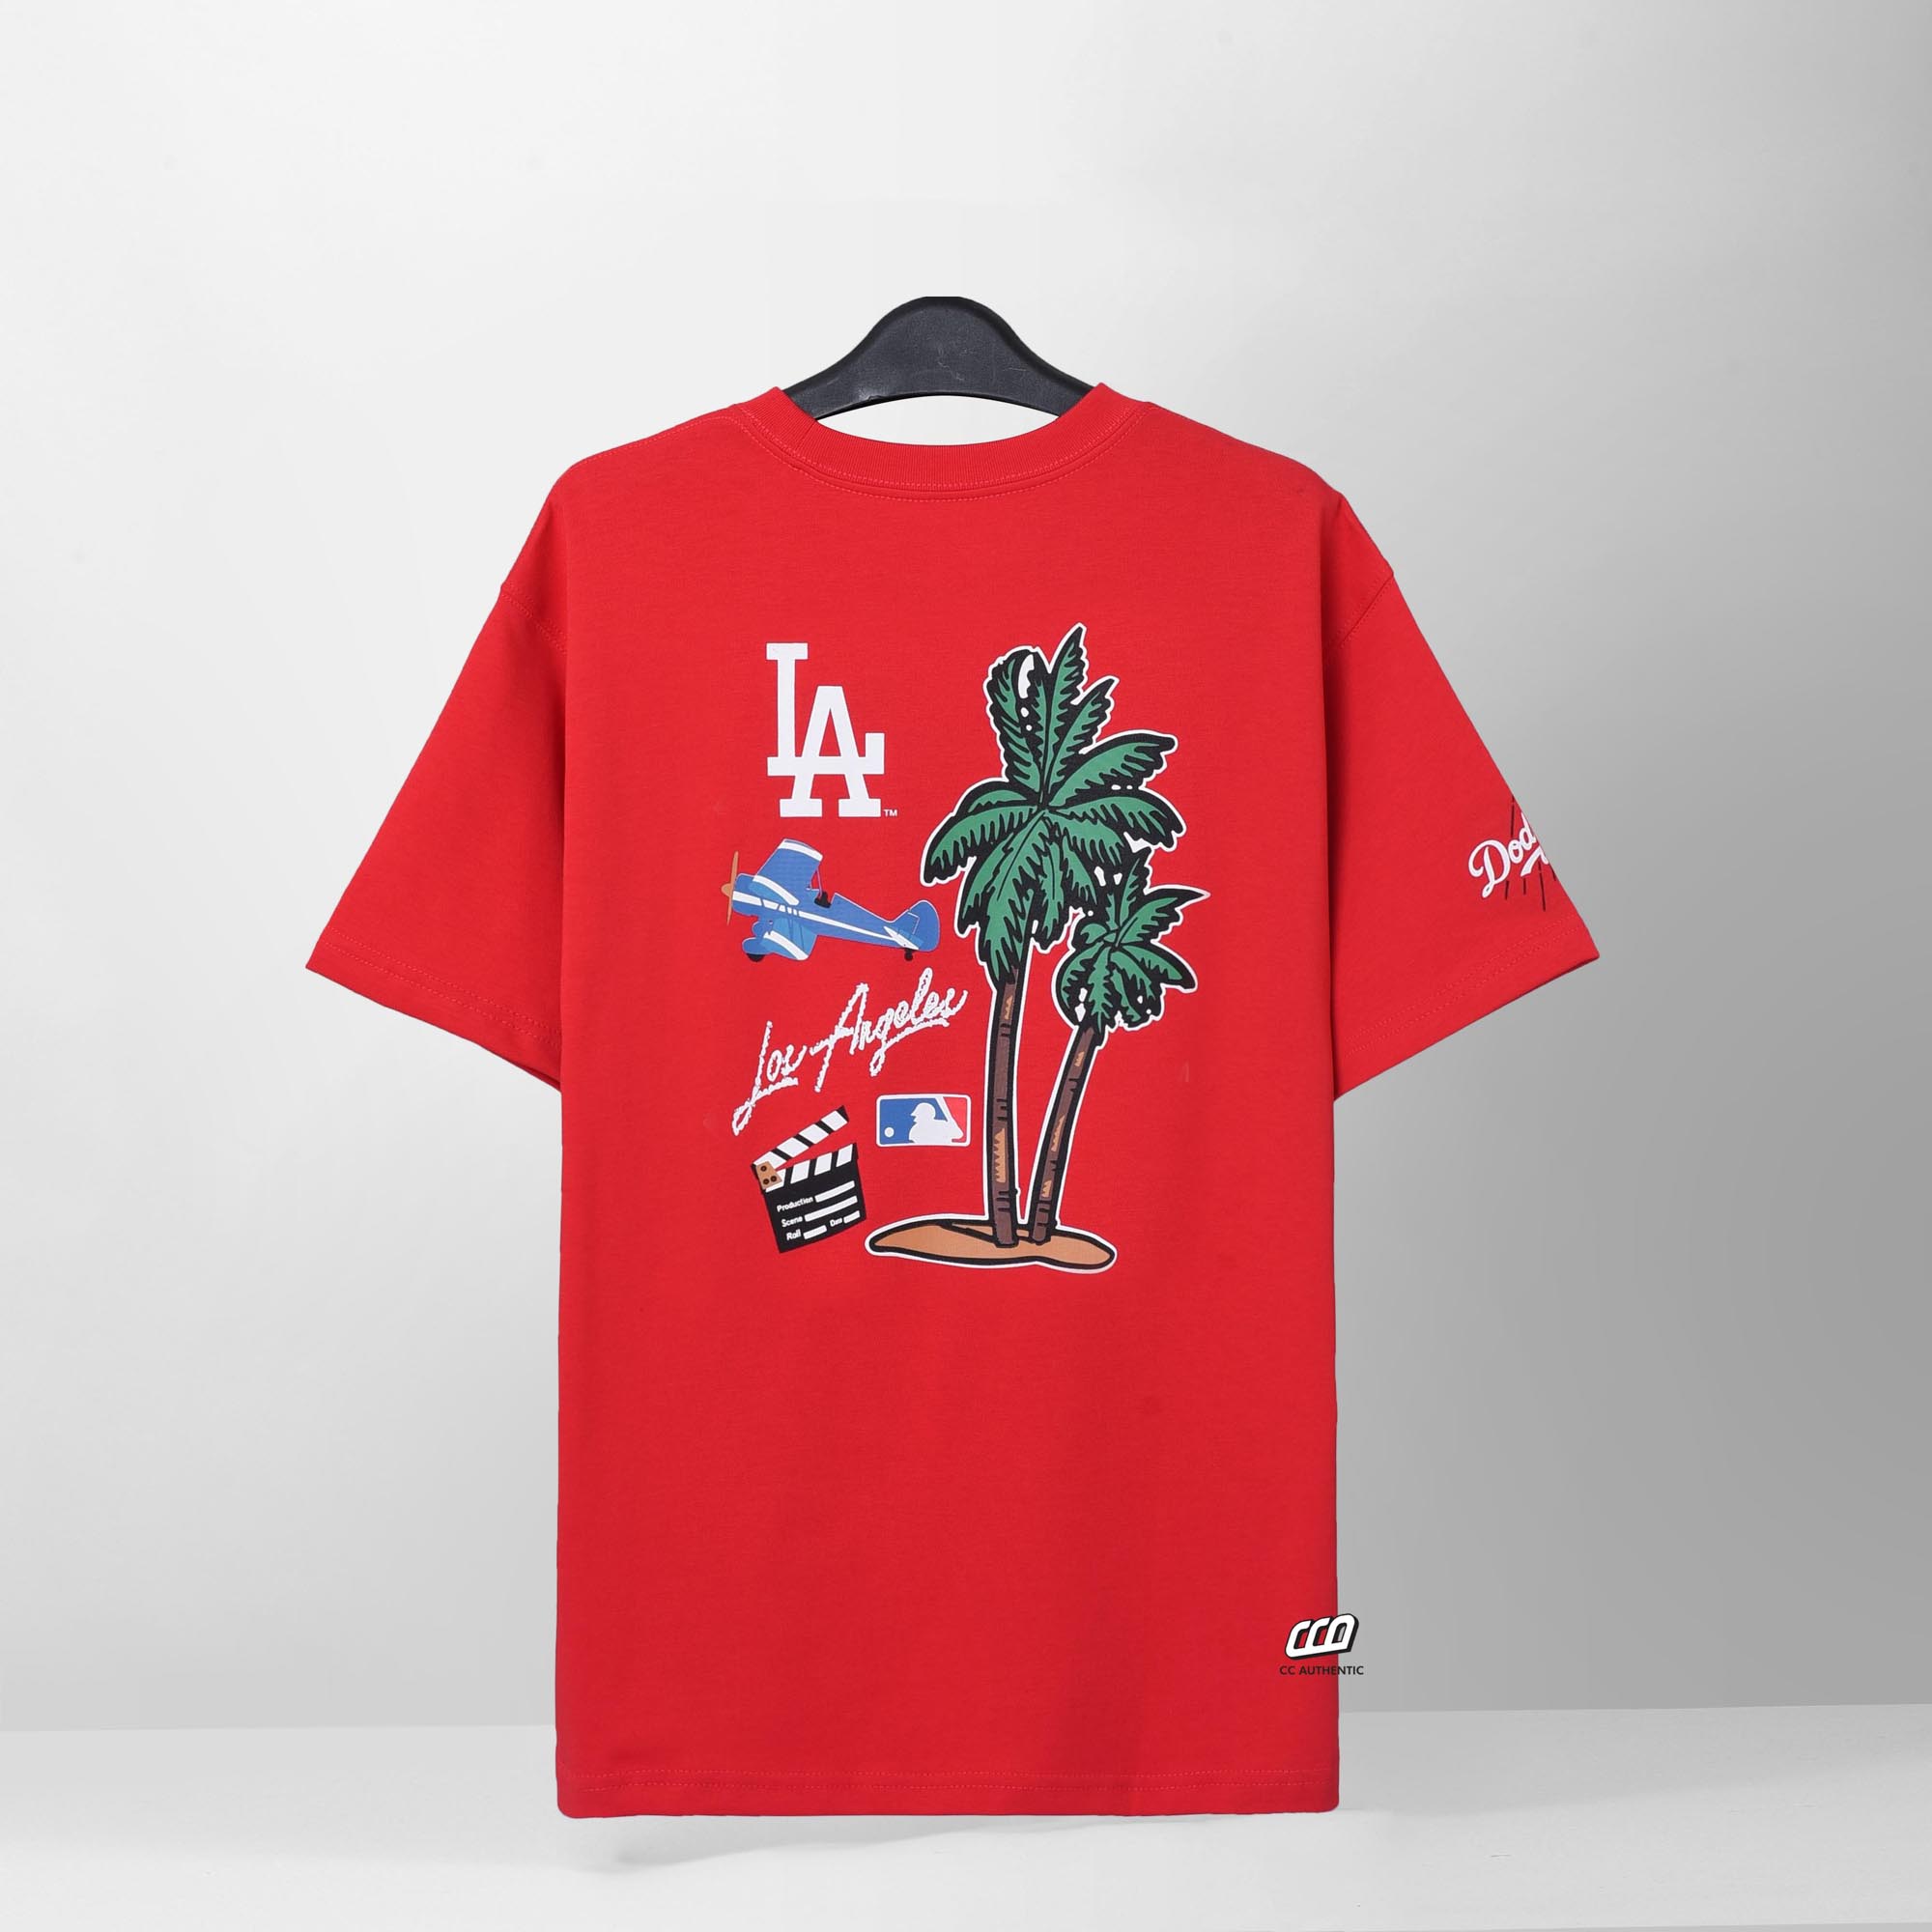 NEW ERA CITY ICONS RS13 T-SHIRT - RED